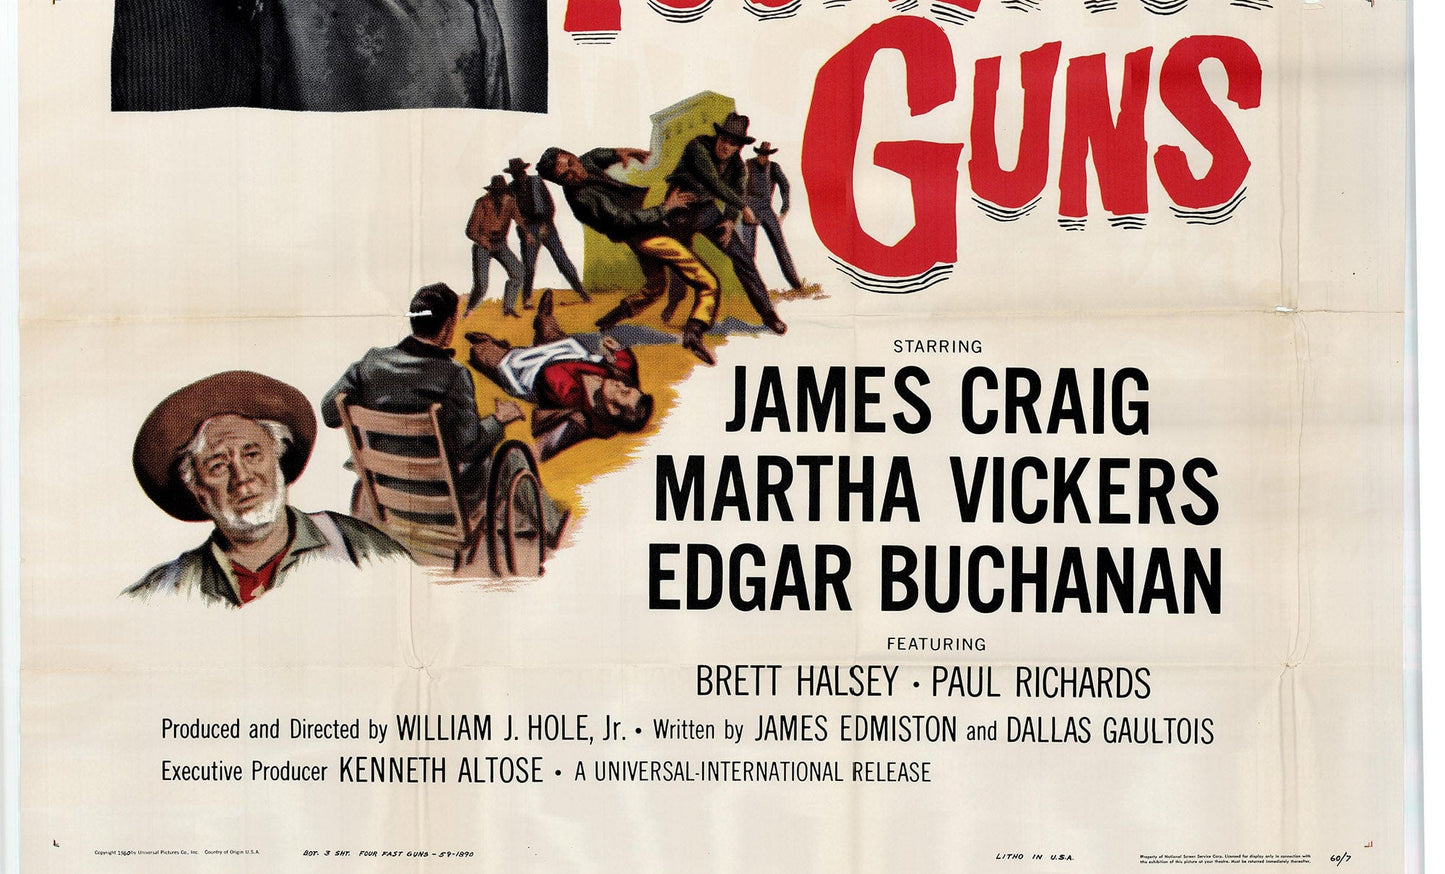 Four Fast Guns - Classic 2 Panel Movie Poster